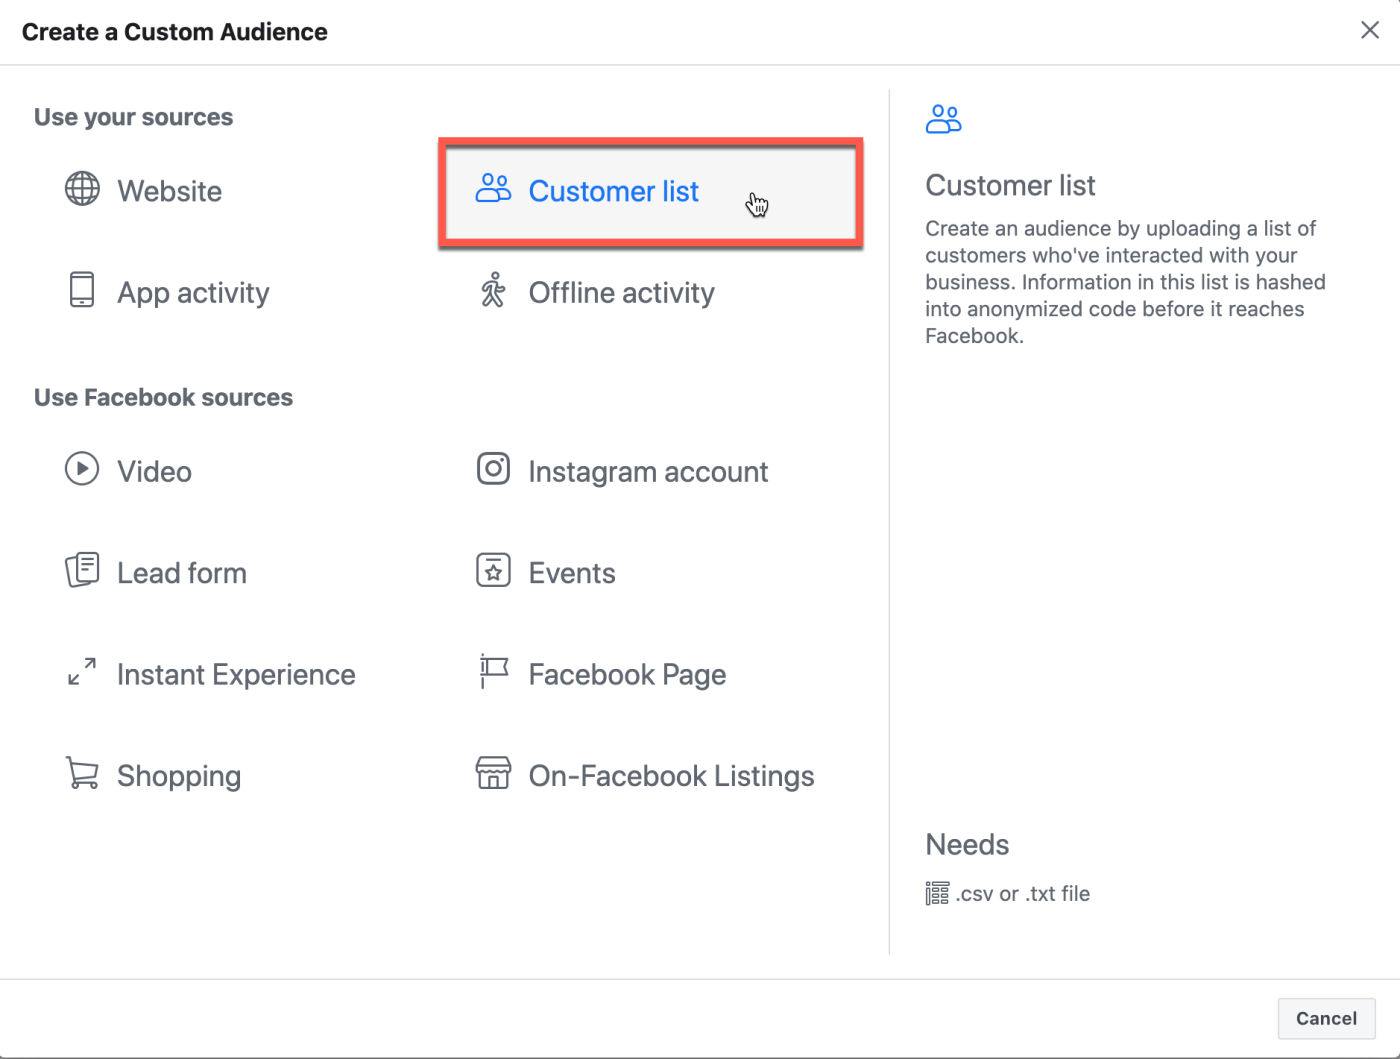 The Create a Custom Audience section with Customer List link